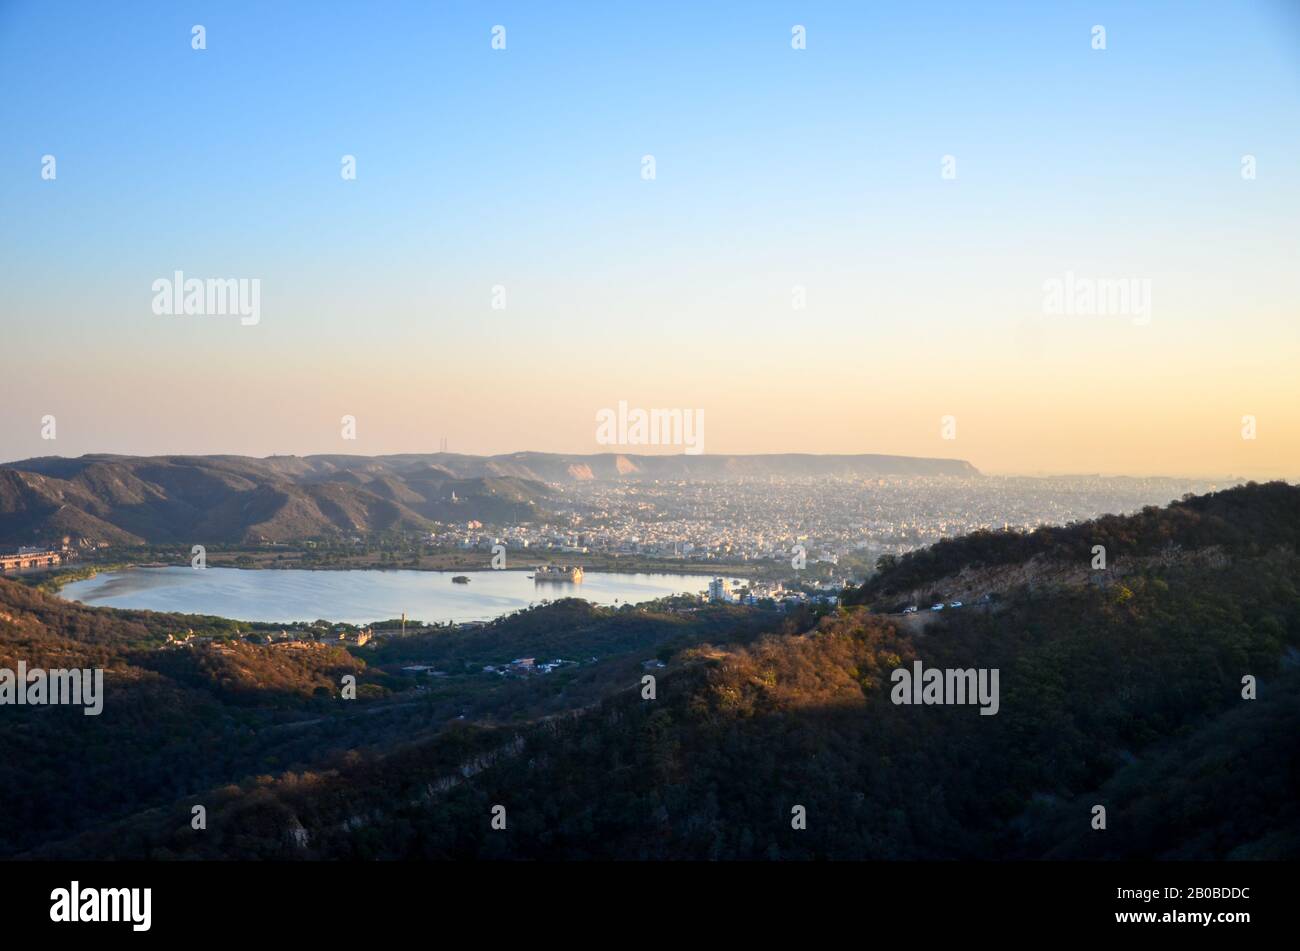 Evening view of Jal Mahal from Jaigarh Fort, Jaipur, Rajasthan, India Stock Photo